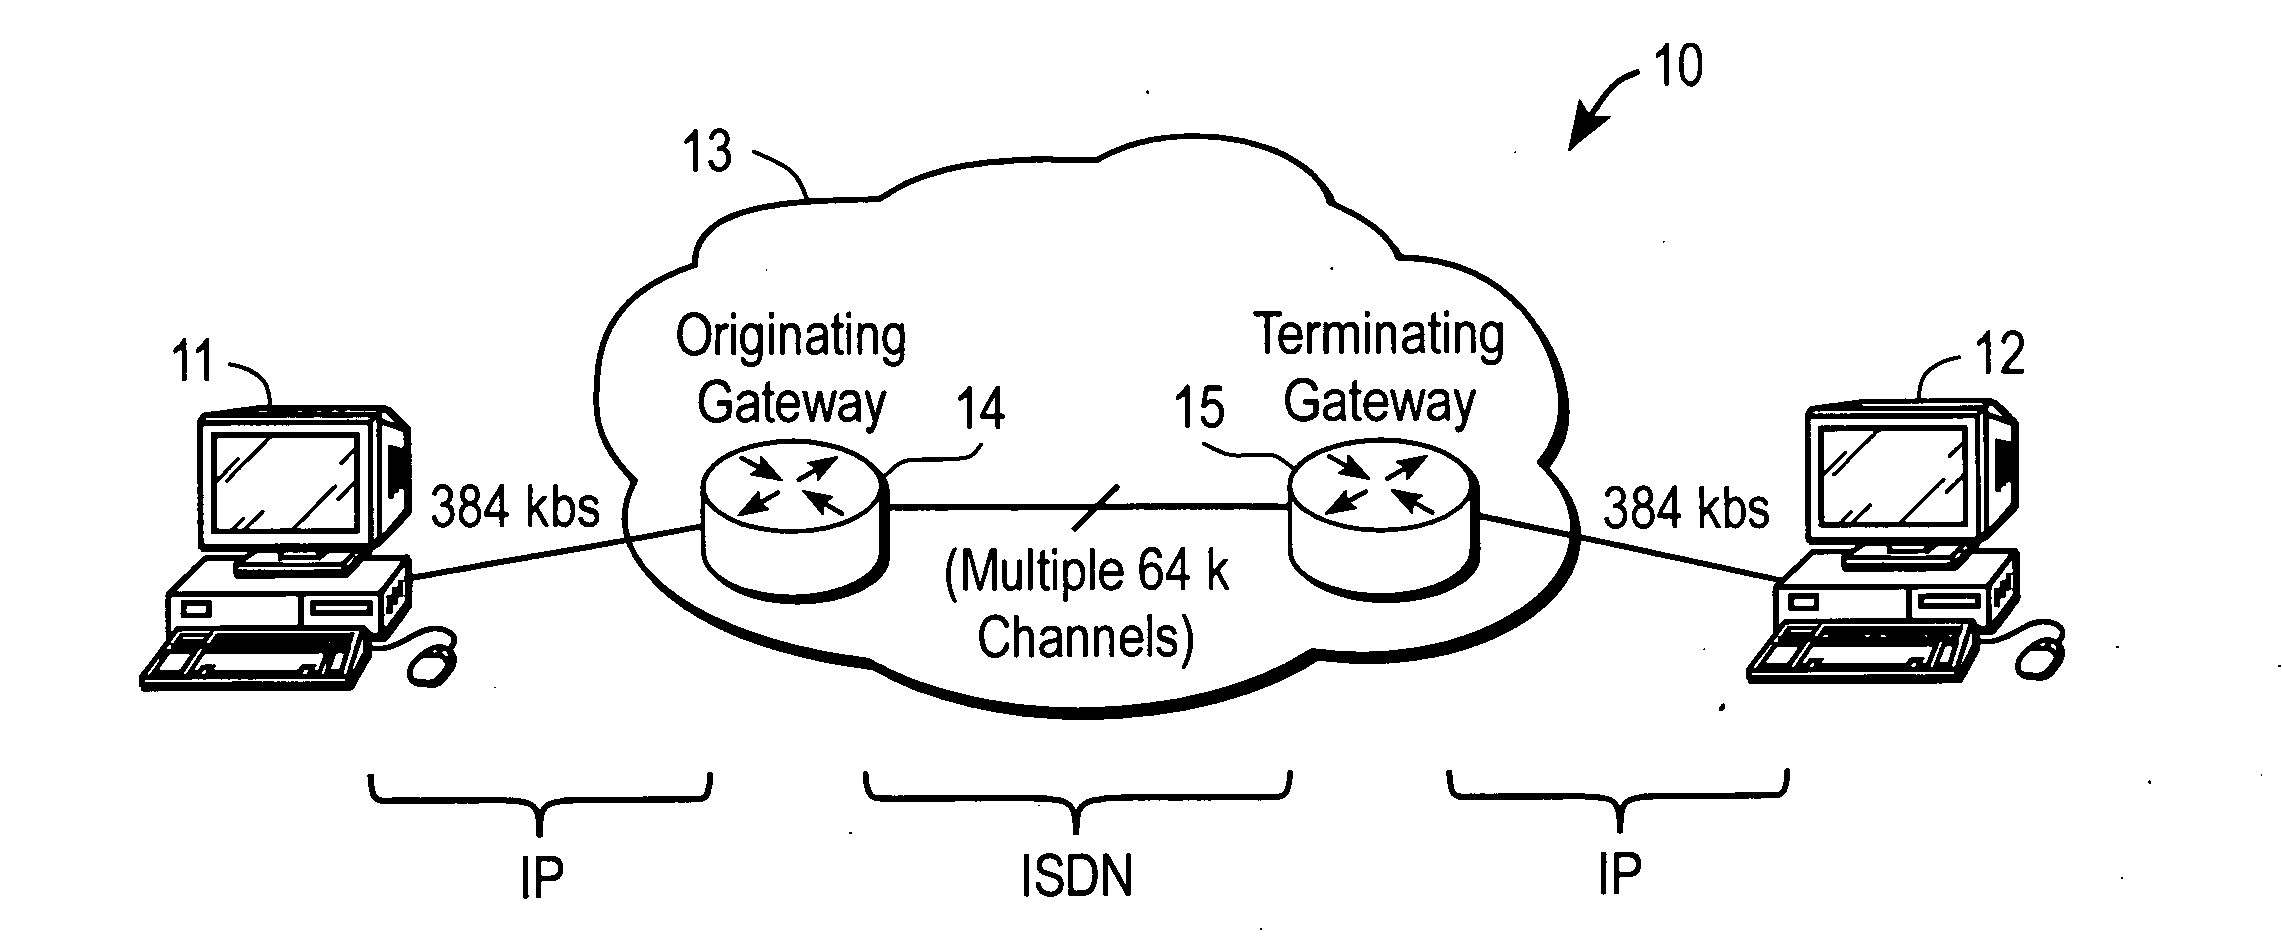 Interconnecting IP video endpoints with reduced H.320 call setup time